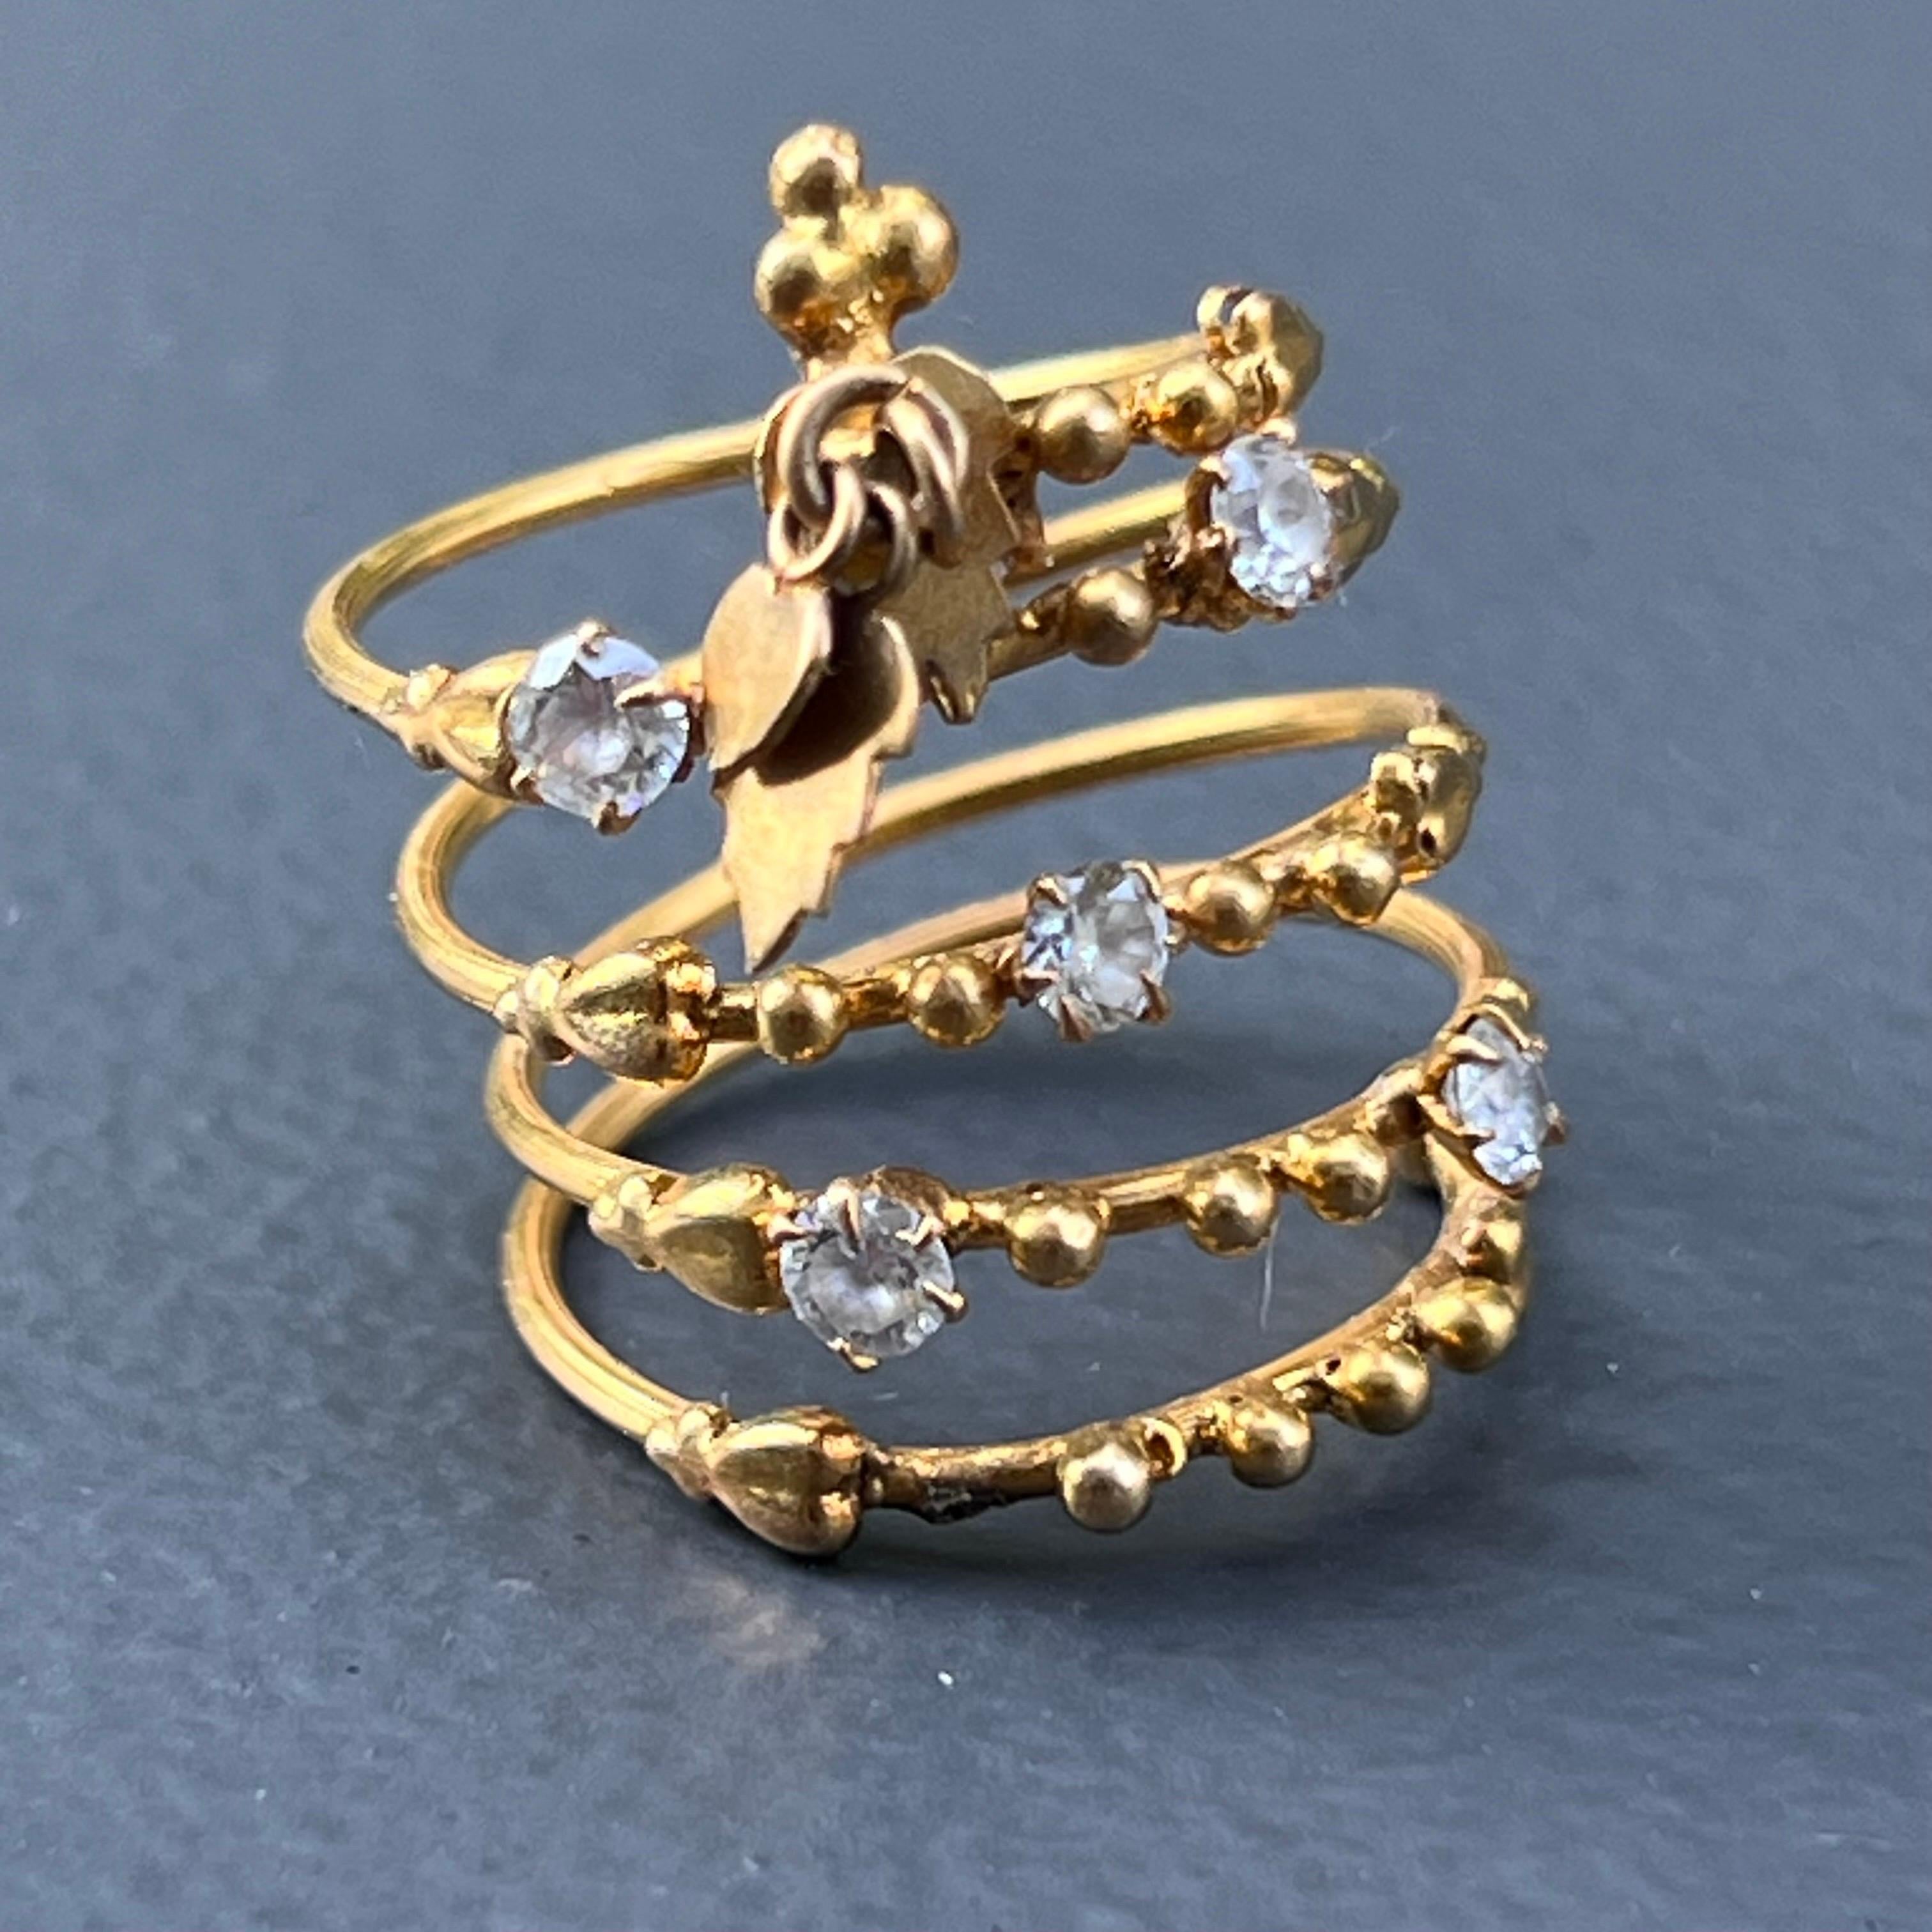 23 Karat solid gold coiled Ring Handmade Jewelry  For Sale 4